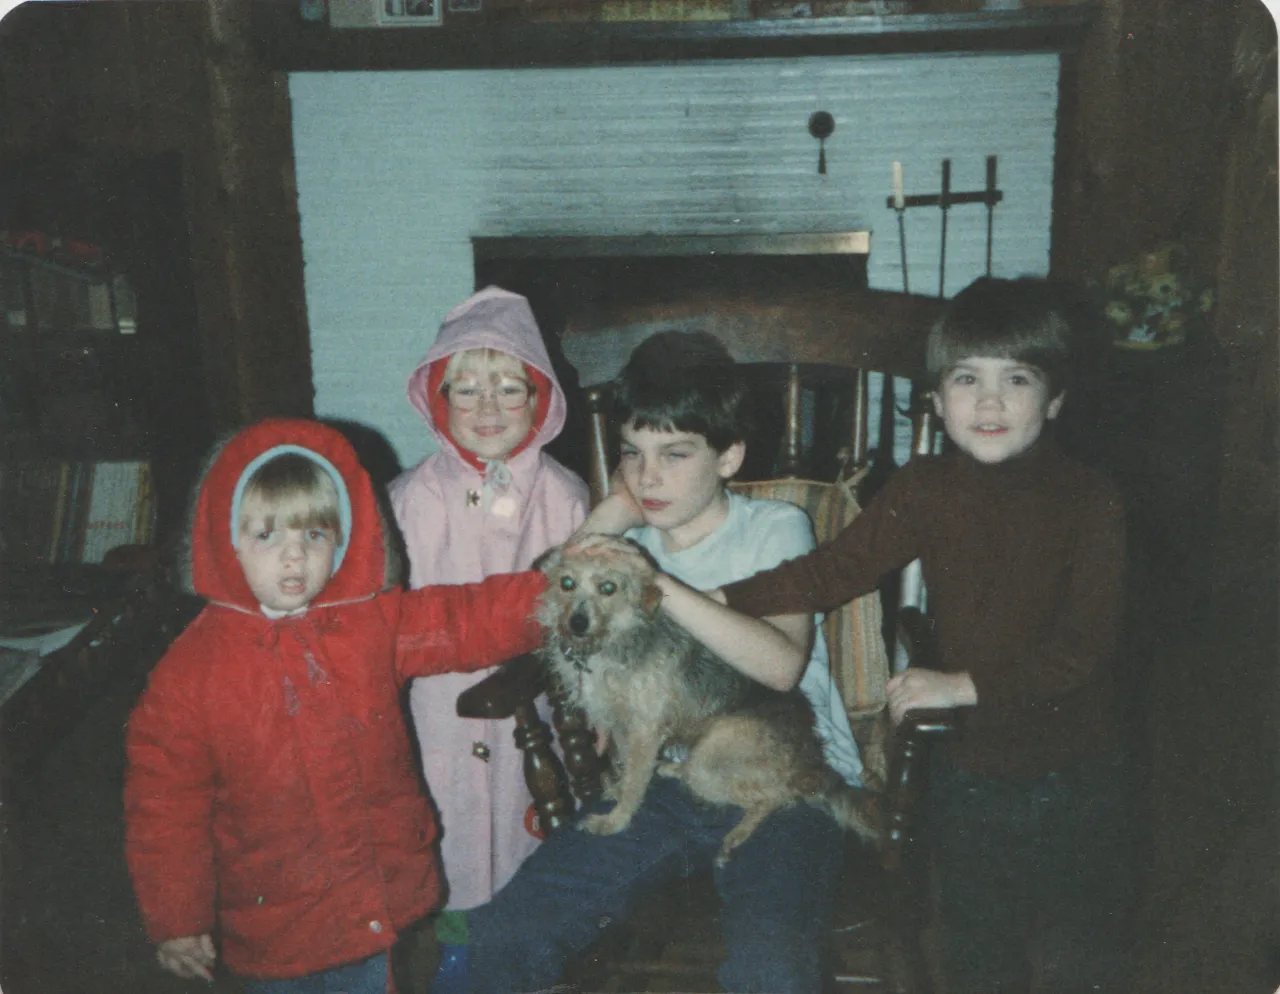 1985-08-16 - Friday - Rick in red rain jacket, Katie in pink jacket, Nathan petting a tan dog, Alan in brown long-sleeves, no date on this photo, at Karen's house.png